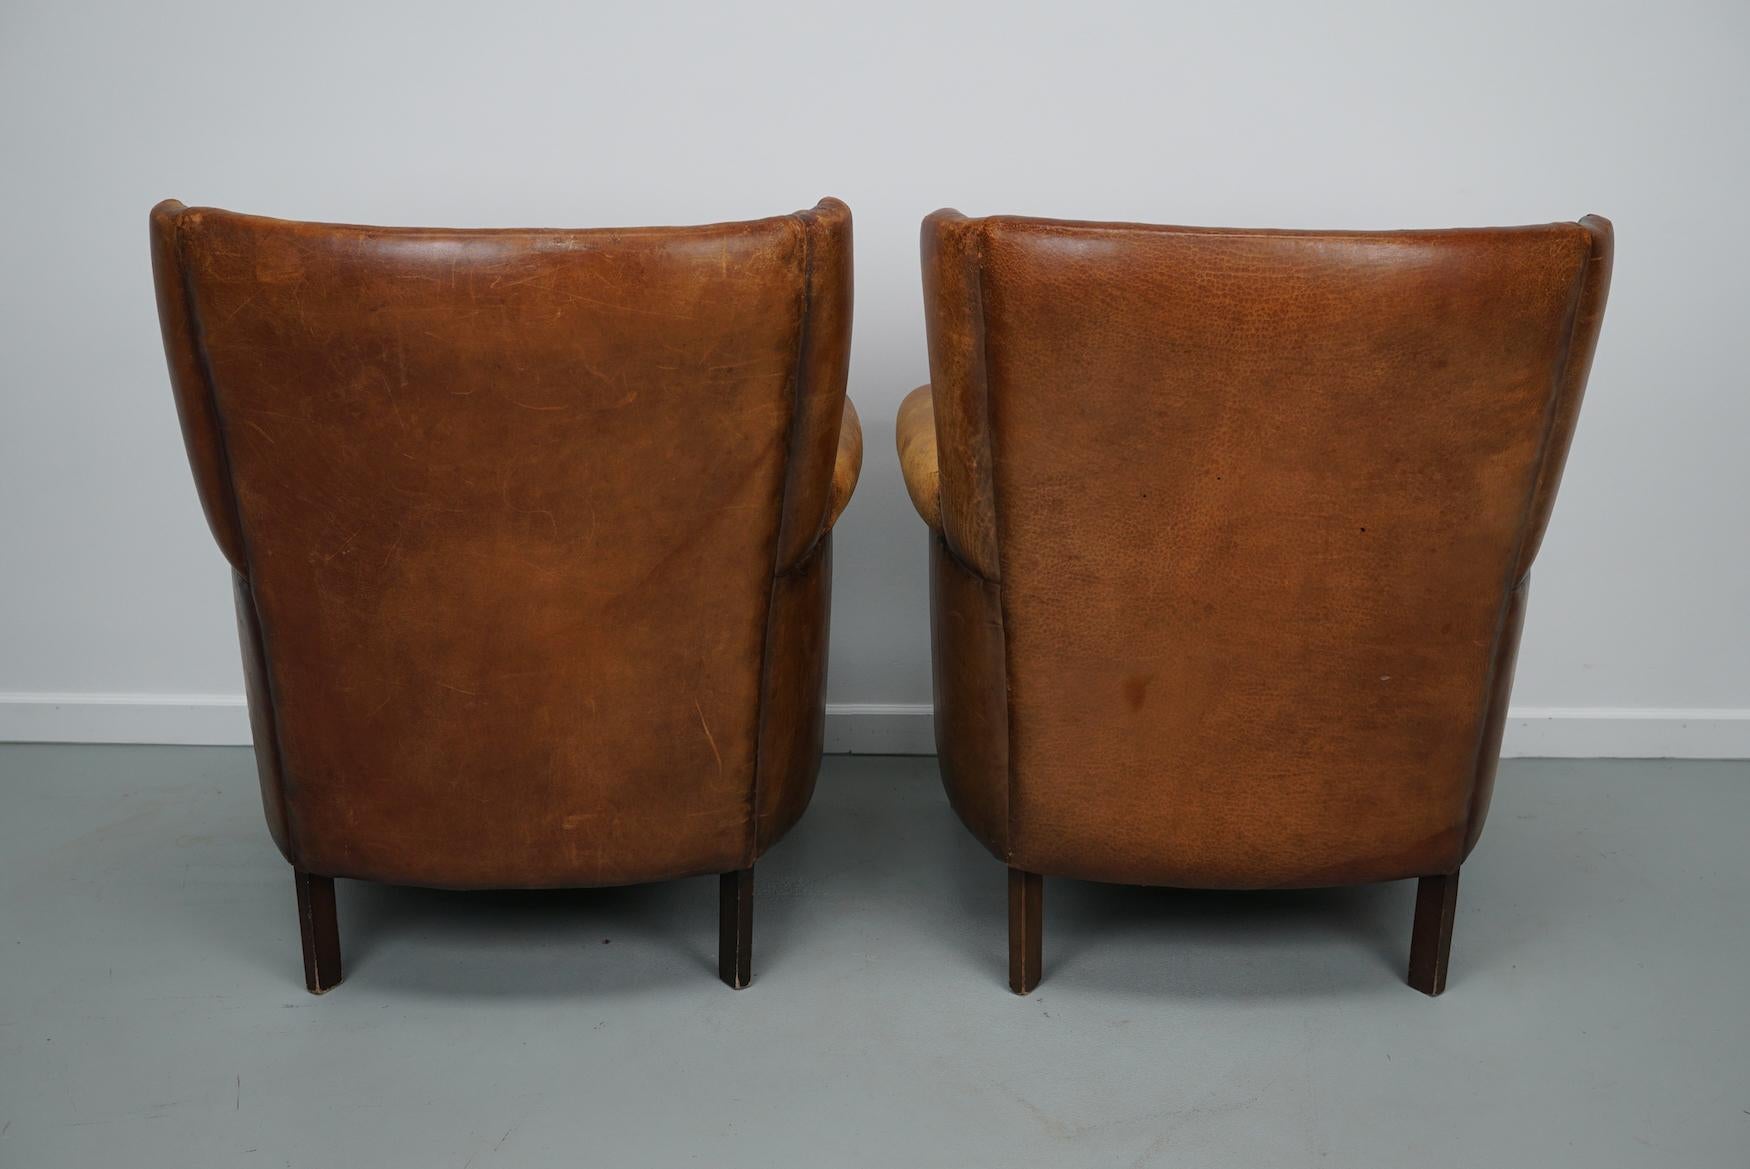 Vintage Dutch Cognac Colored Leather Club Chair, Set of 2 with Footstool 3